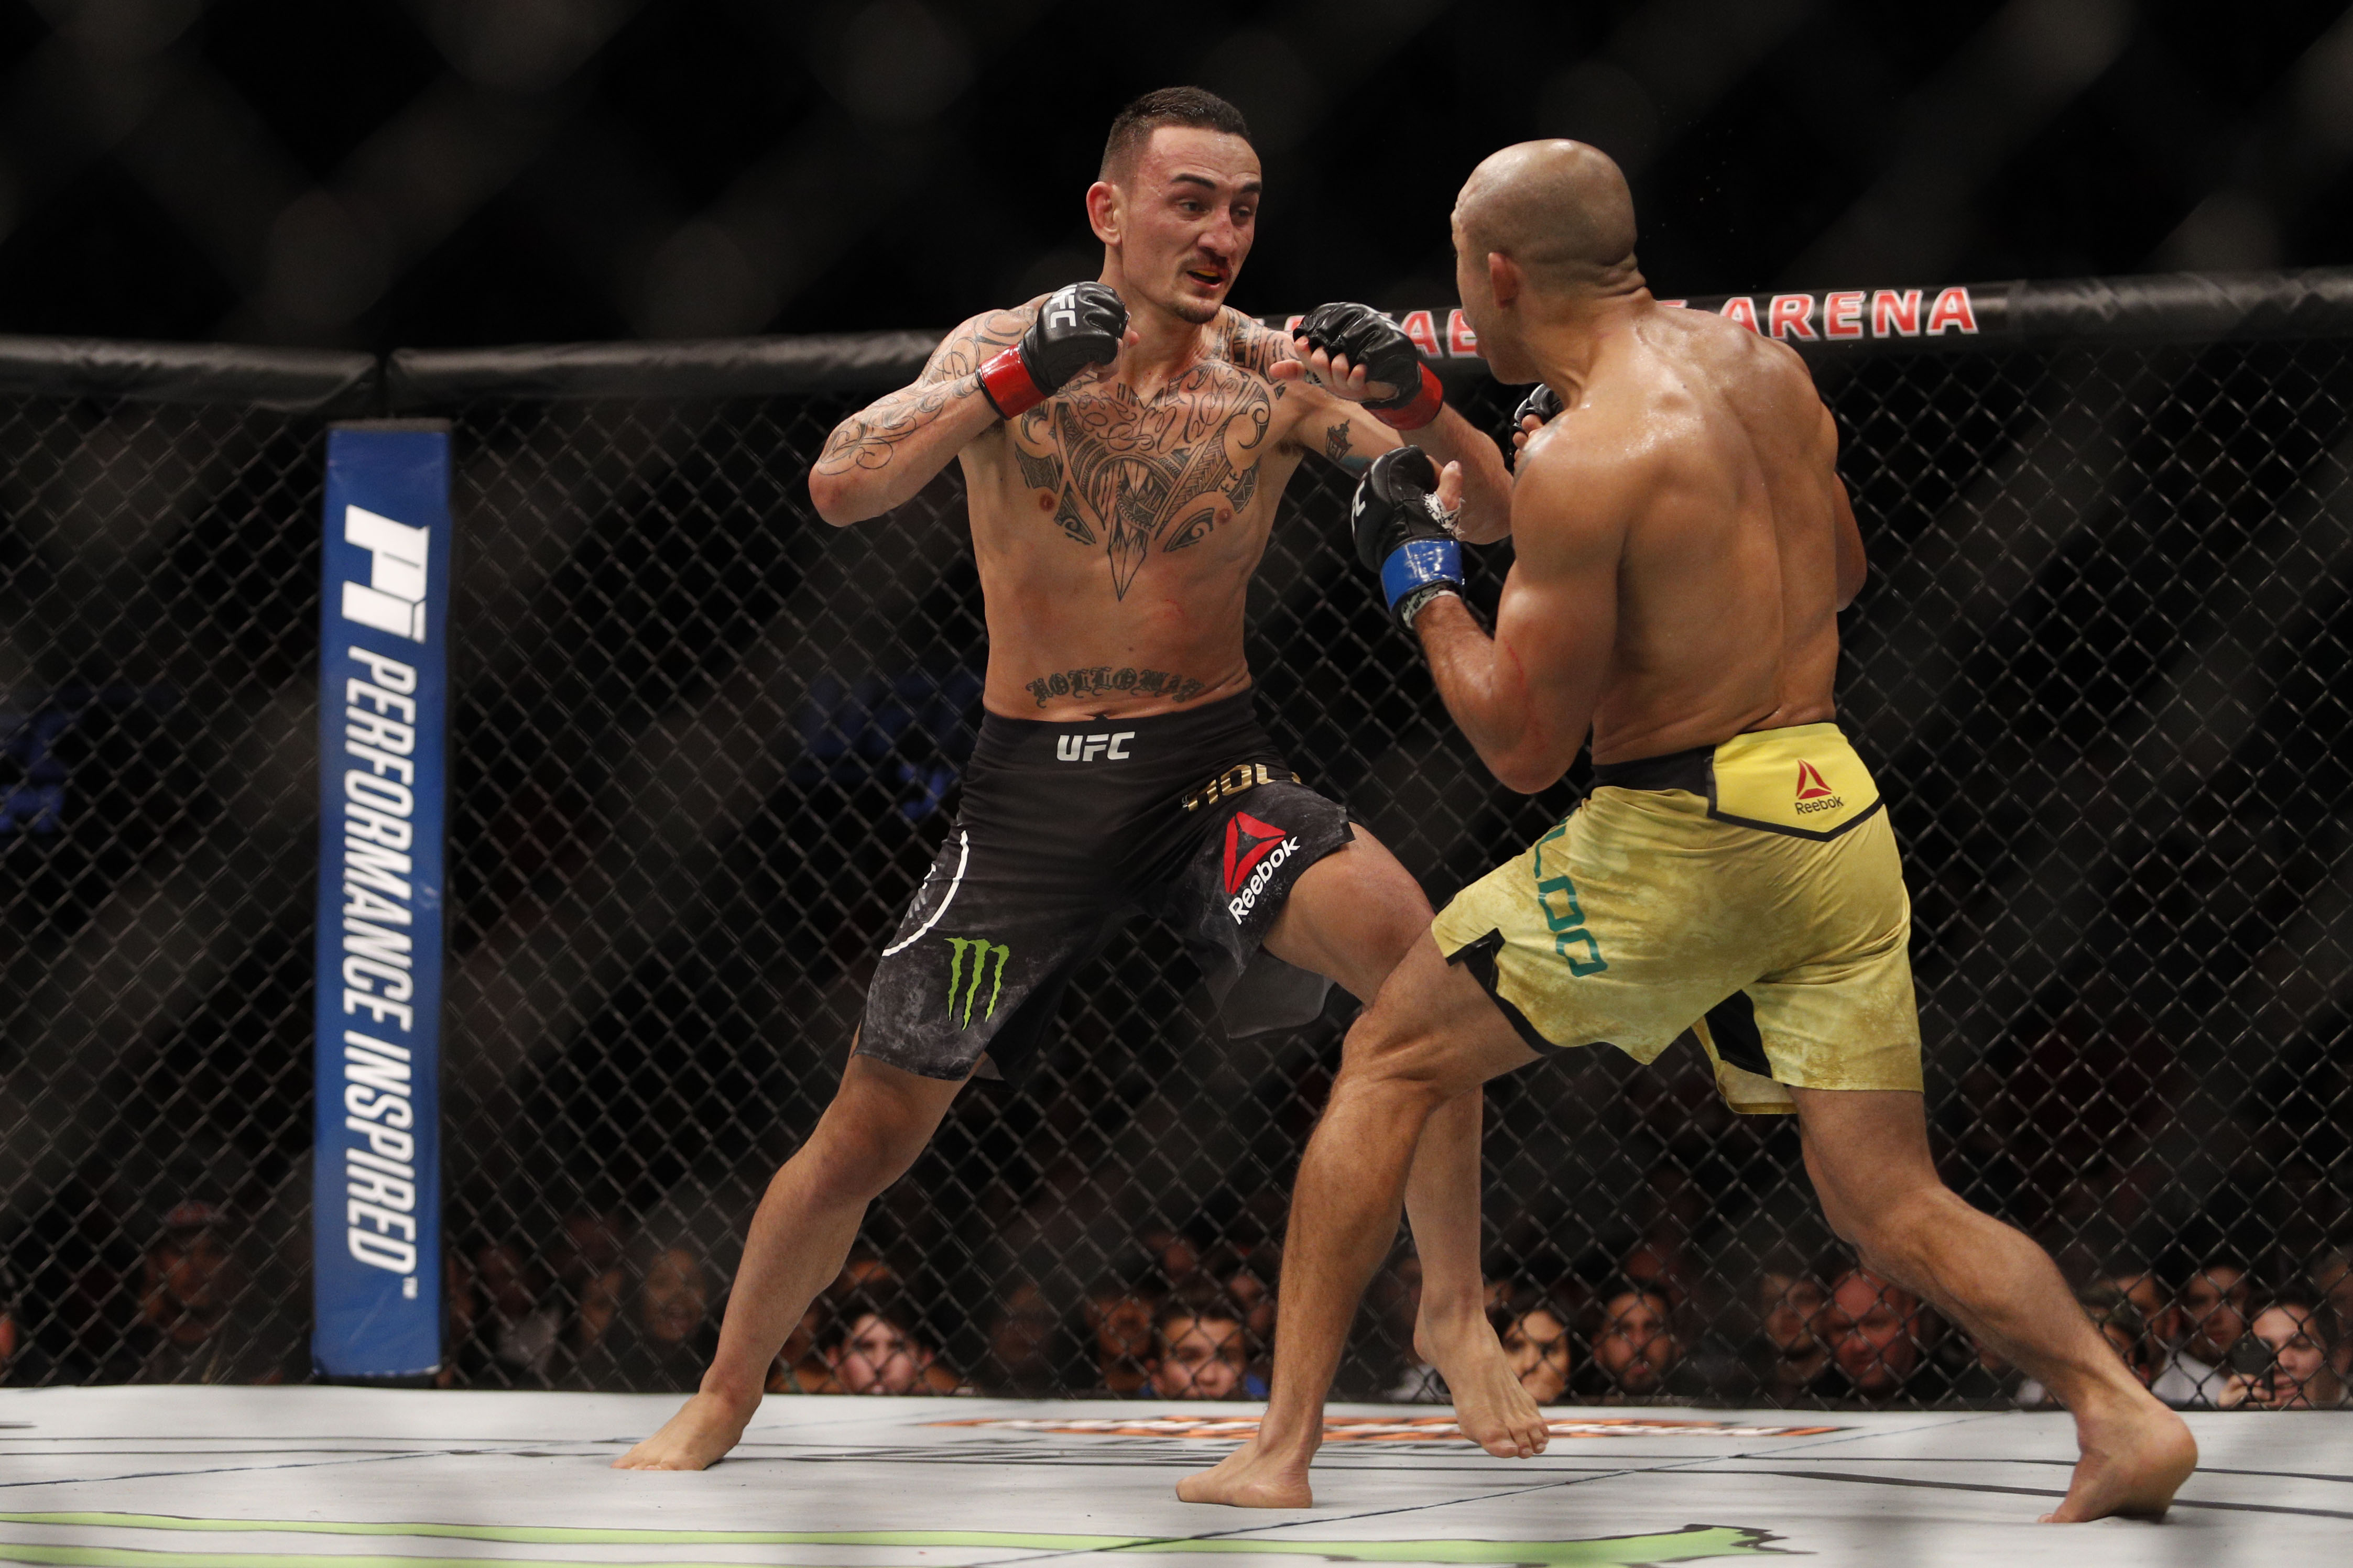 Max Holloway, Clearly Not Himself, Pulled From UFC 226 Card